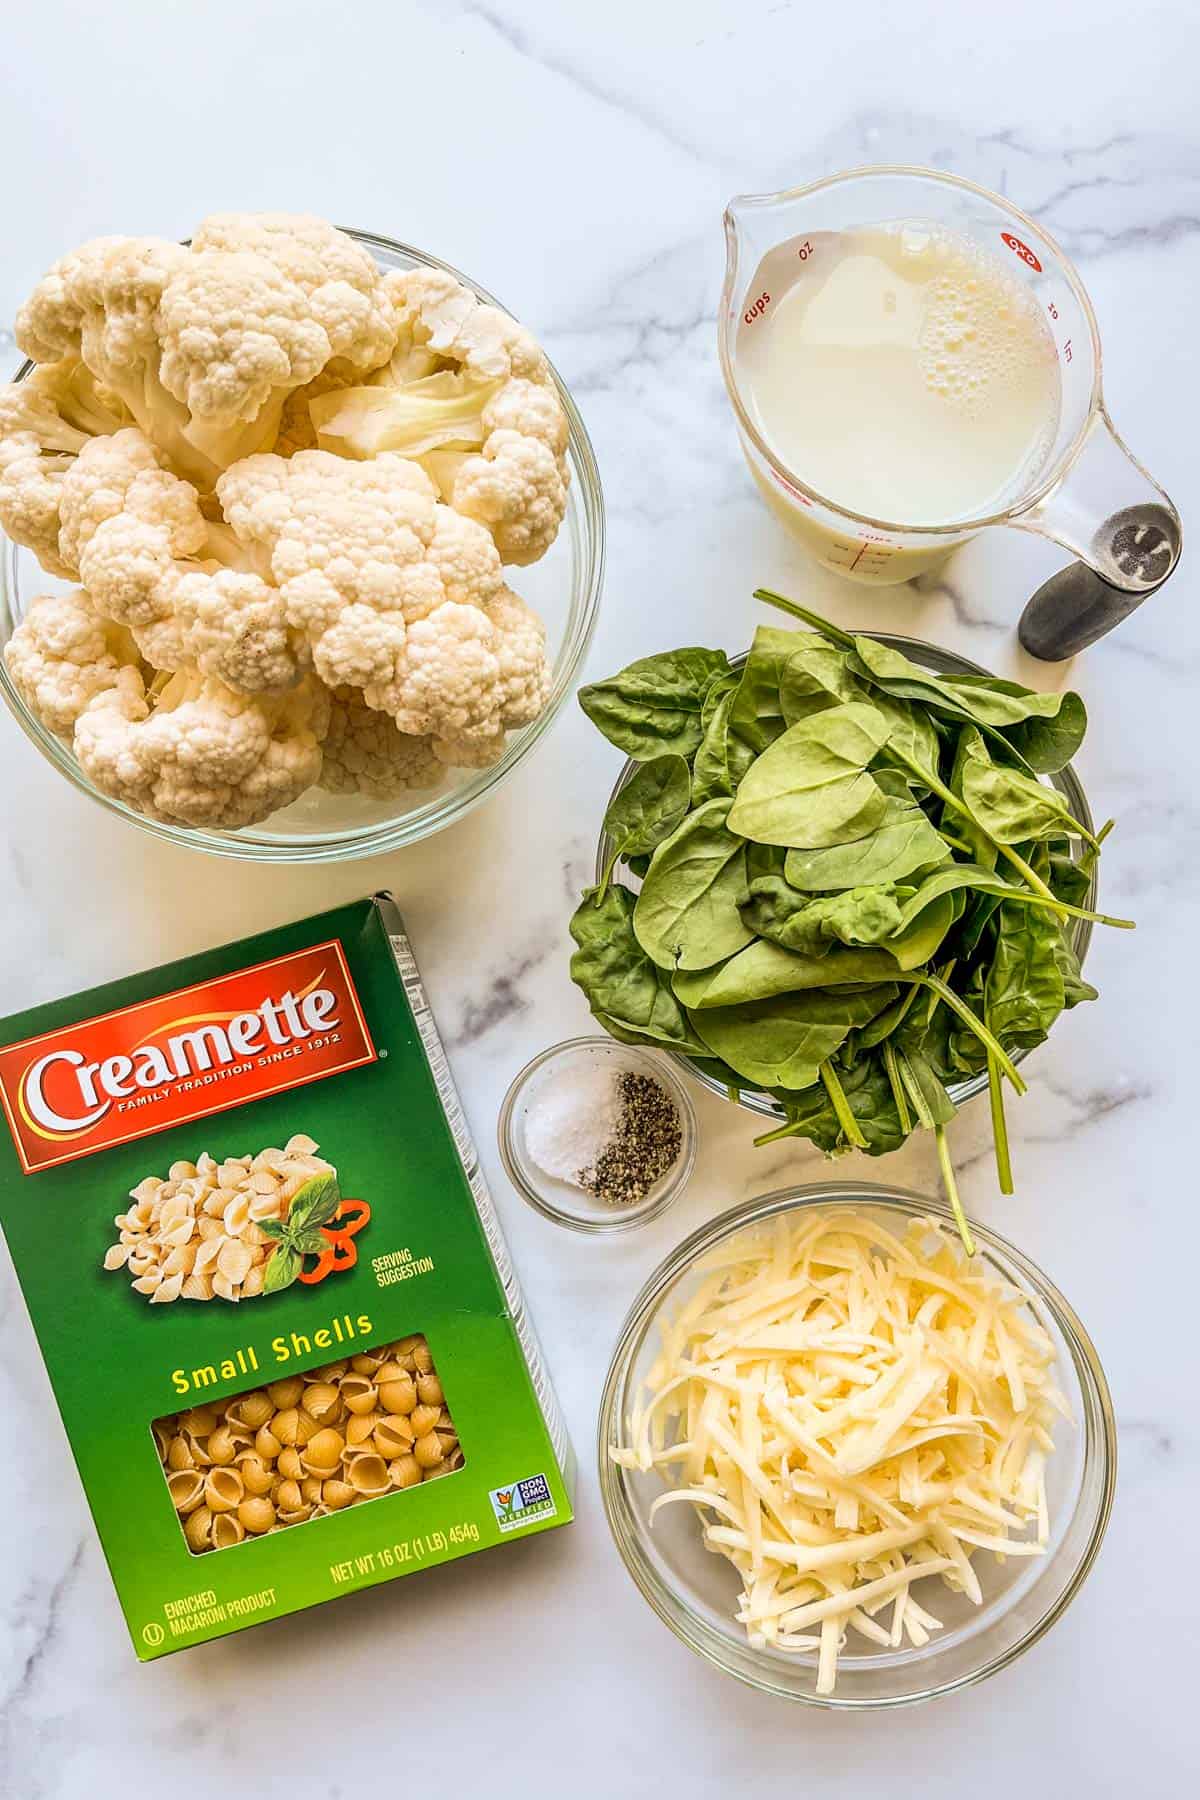 Ingredients for green mac and cheese.